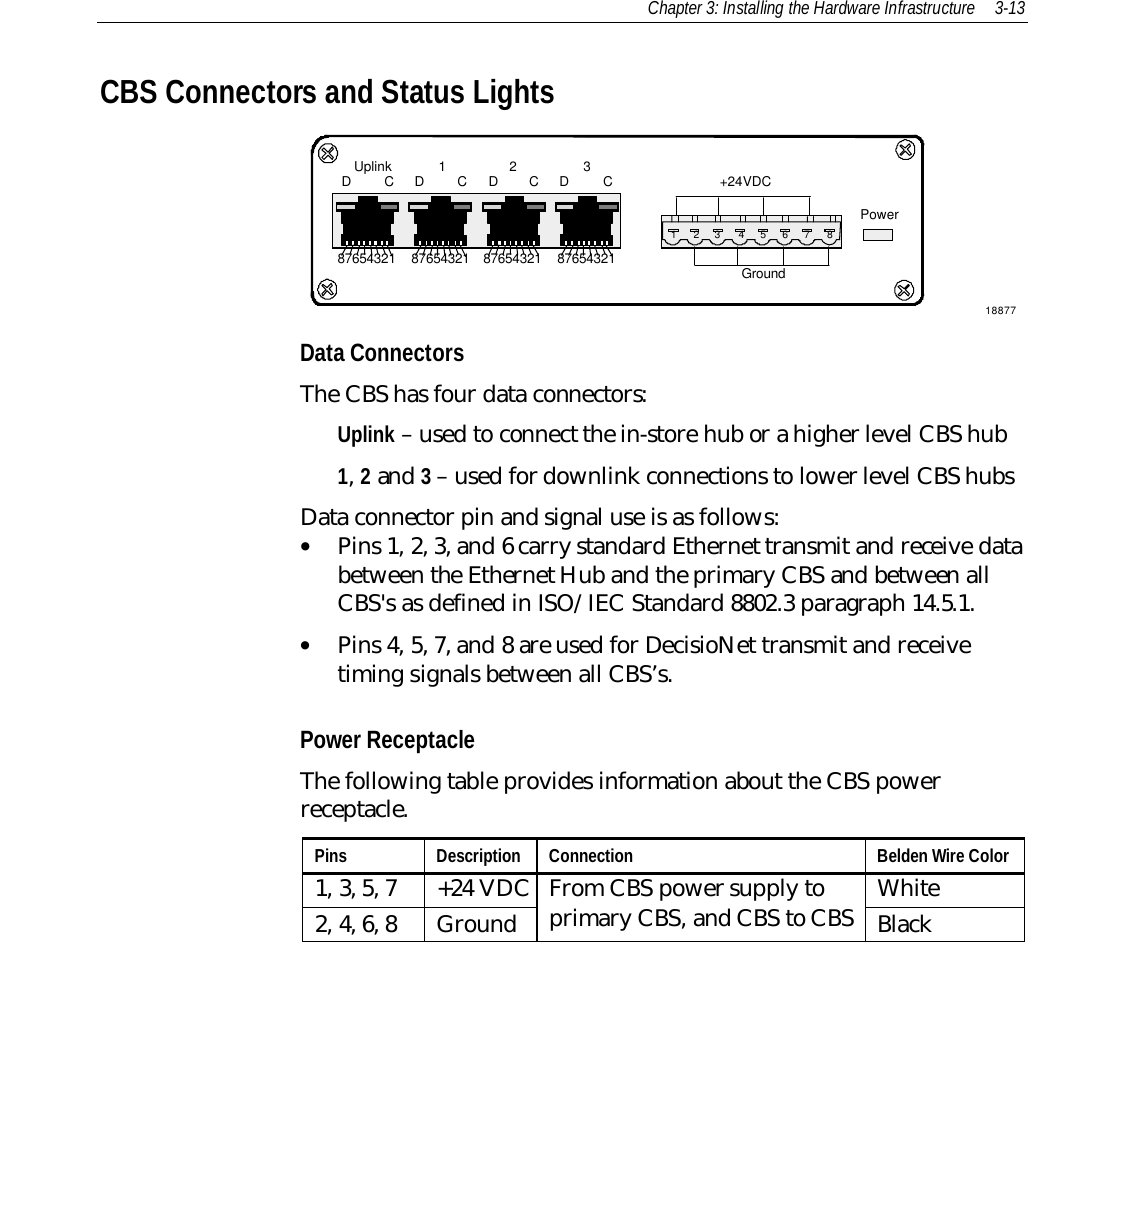 Chapter 3: Installing the Hardware Infrastructure 3-13CBS Connectors and Status Lights188778765432112 453678UplinkDDDDCCCC12 3 +24VDCGroundPower87654321 87654321 87654321Data ConnectorsThe CBS has four data connectors:Uplink – used to connect the in-store hub or a higher level CBS hub1, 2 and 3 – used for downlink connections to lower level CBS hubsData connector pin and signal use is as follows:• Pins 1, 2, 3, and 6 carry standard Ethernet transmit and receive databetween the Ethernet Hub and the primary CBS and between allCBS&apos;s as defined in ISO/IEC Standard 8802.3 paragraph 14.5.1.• Pins 4, 5, 7, and 8 are used for DecisioNet transmit and receivetiming signals between all CBS’s.Power ReceptacleThe following table provides information about the CBS powerreceptacle.Pins Description Connection Belden Wire Color1, 3, 5, 7 +24 VDC White2, 4, 6, 8 Ground From CBS power supply toprimary CBS, and CBS to CBS Black